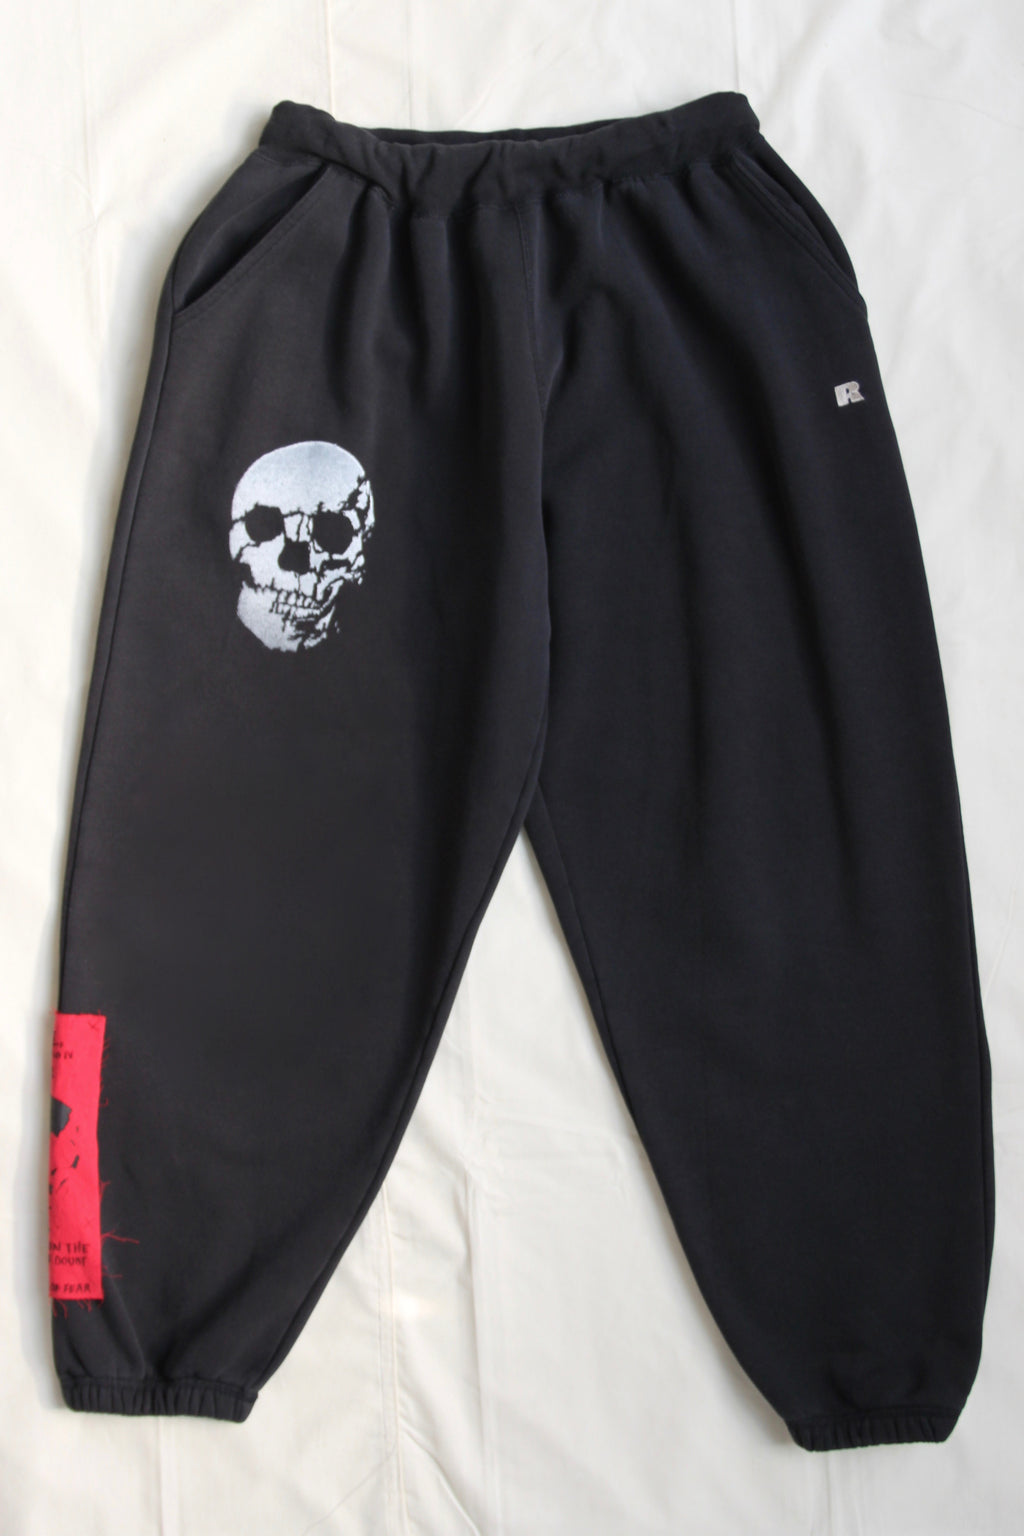 WSL Customized Vintage "Russell" Sweatpants